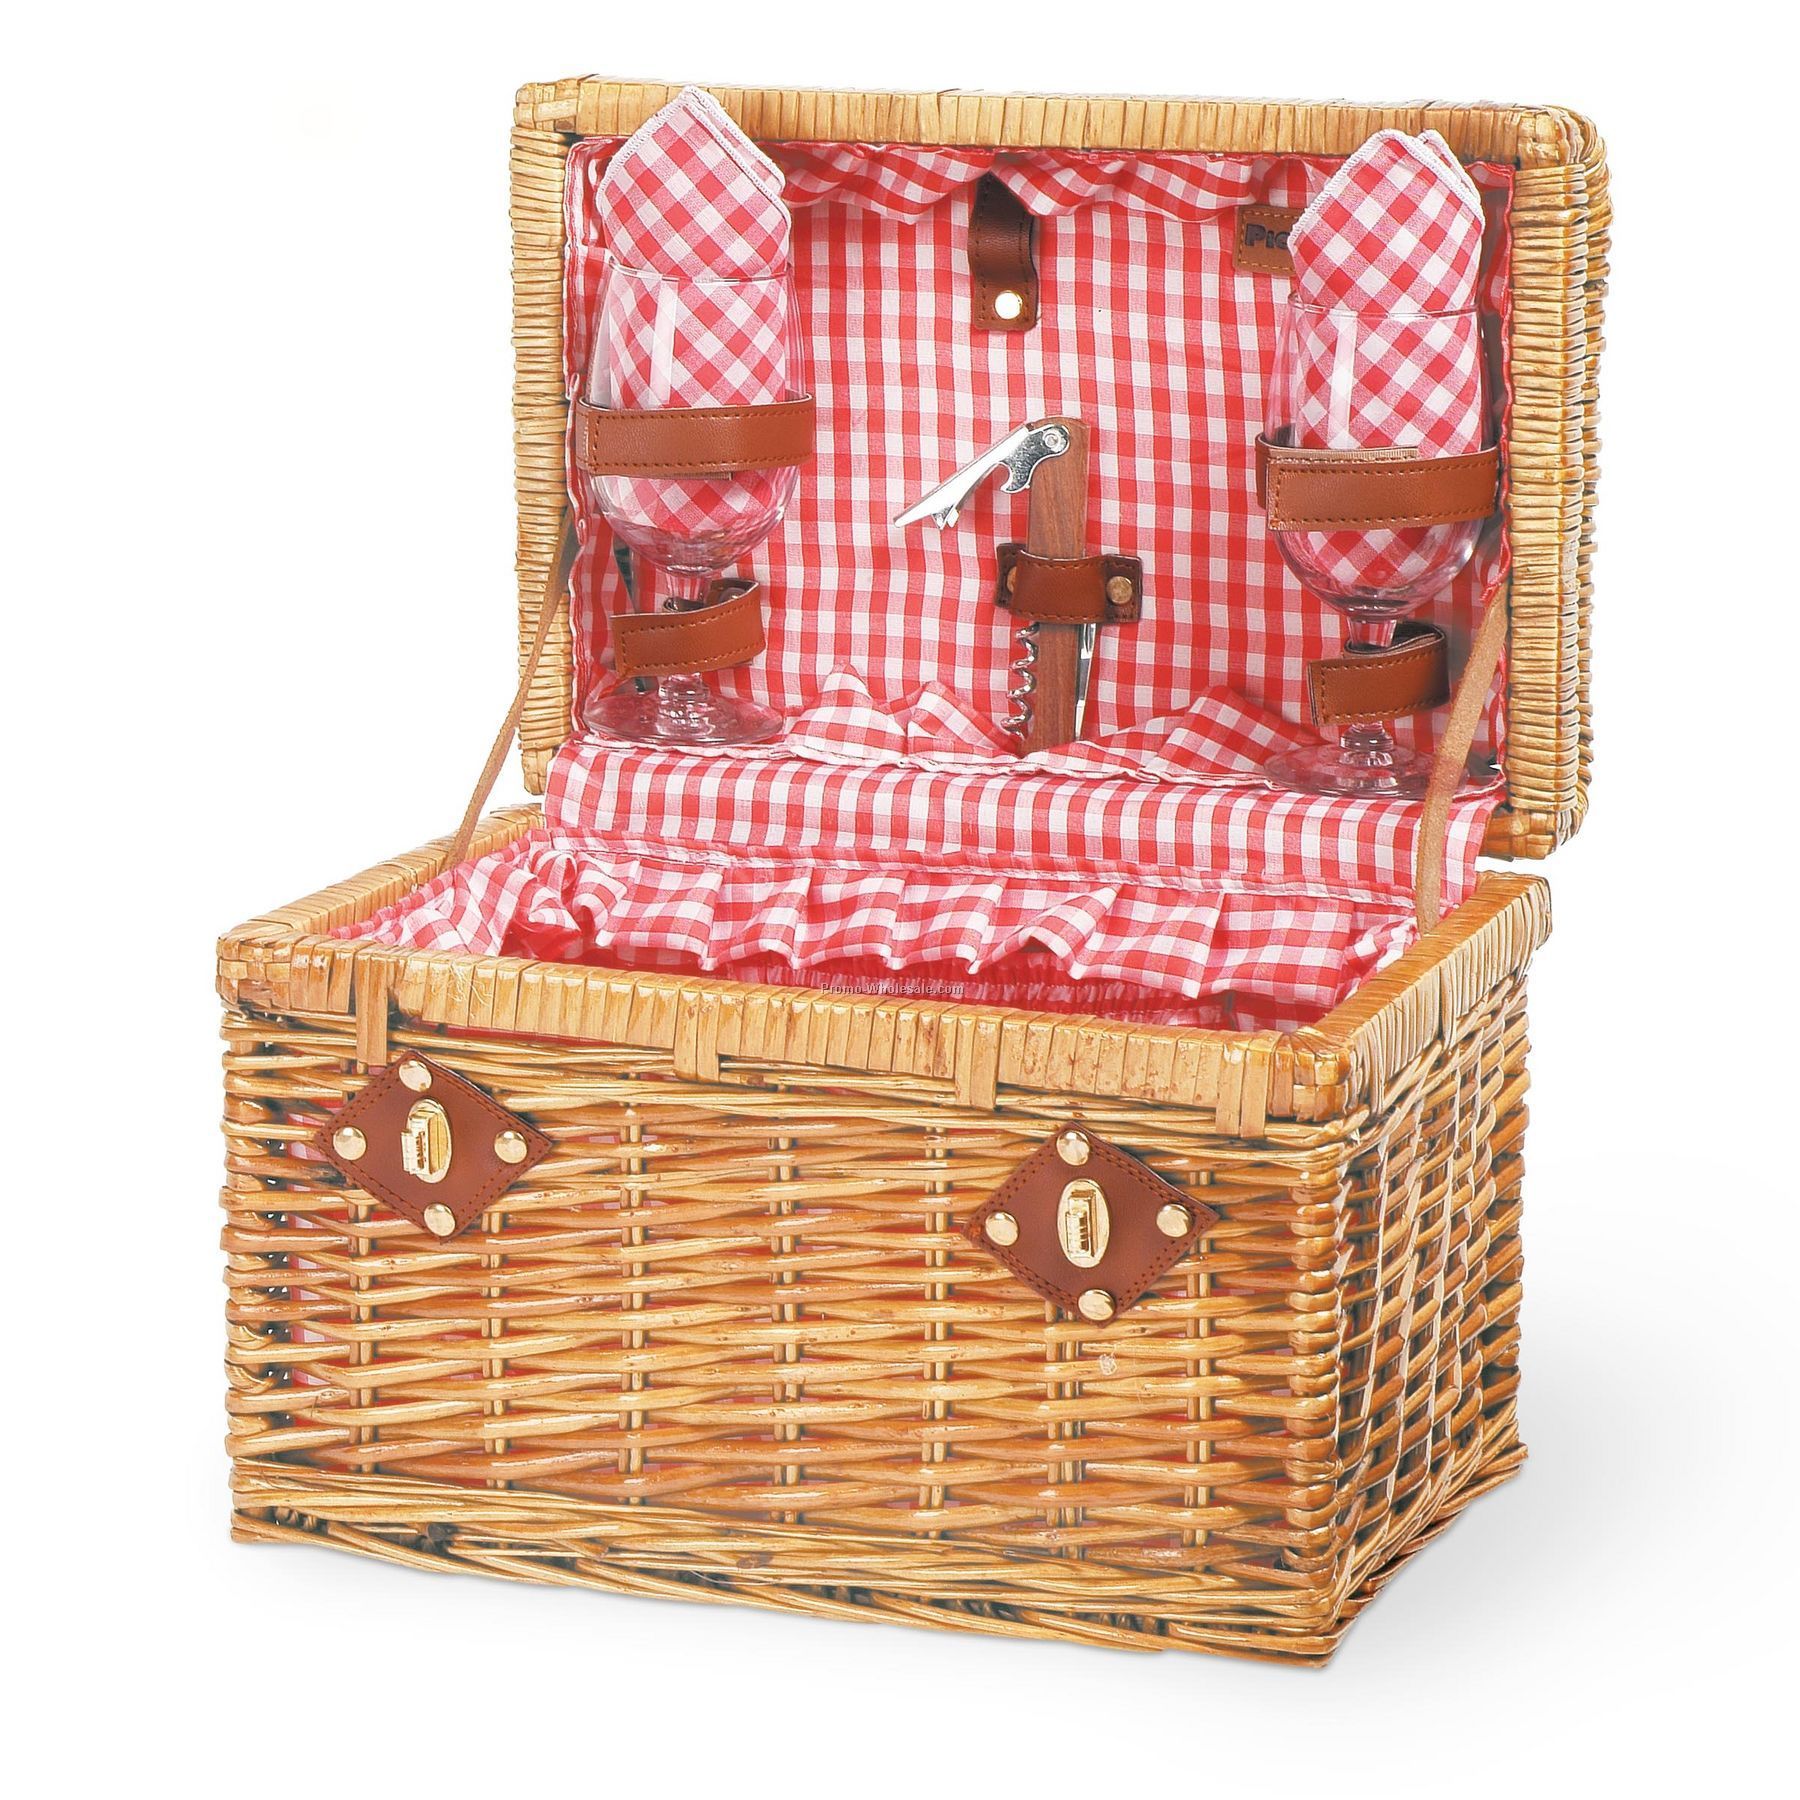 Chardonnay Willow Picnic Basket With Wine Service For 2